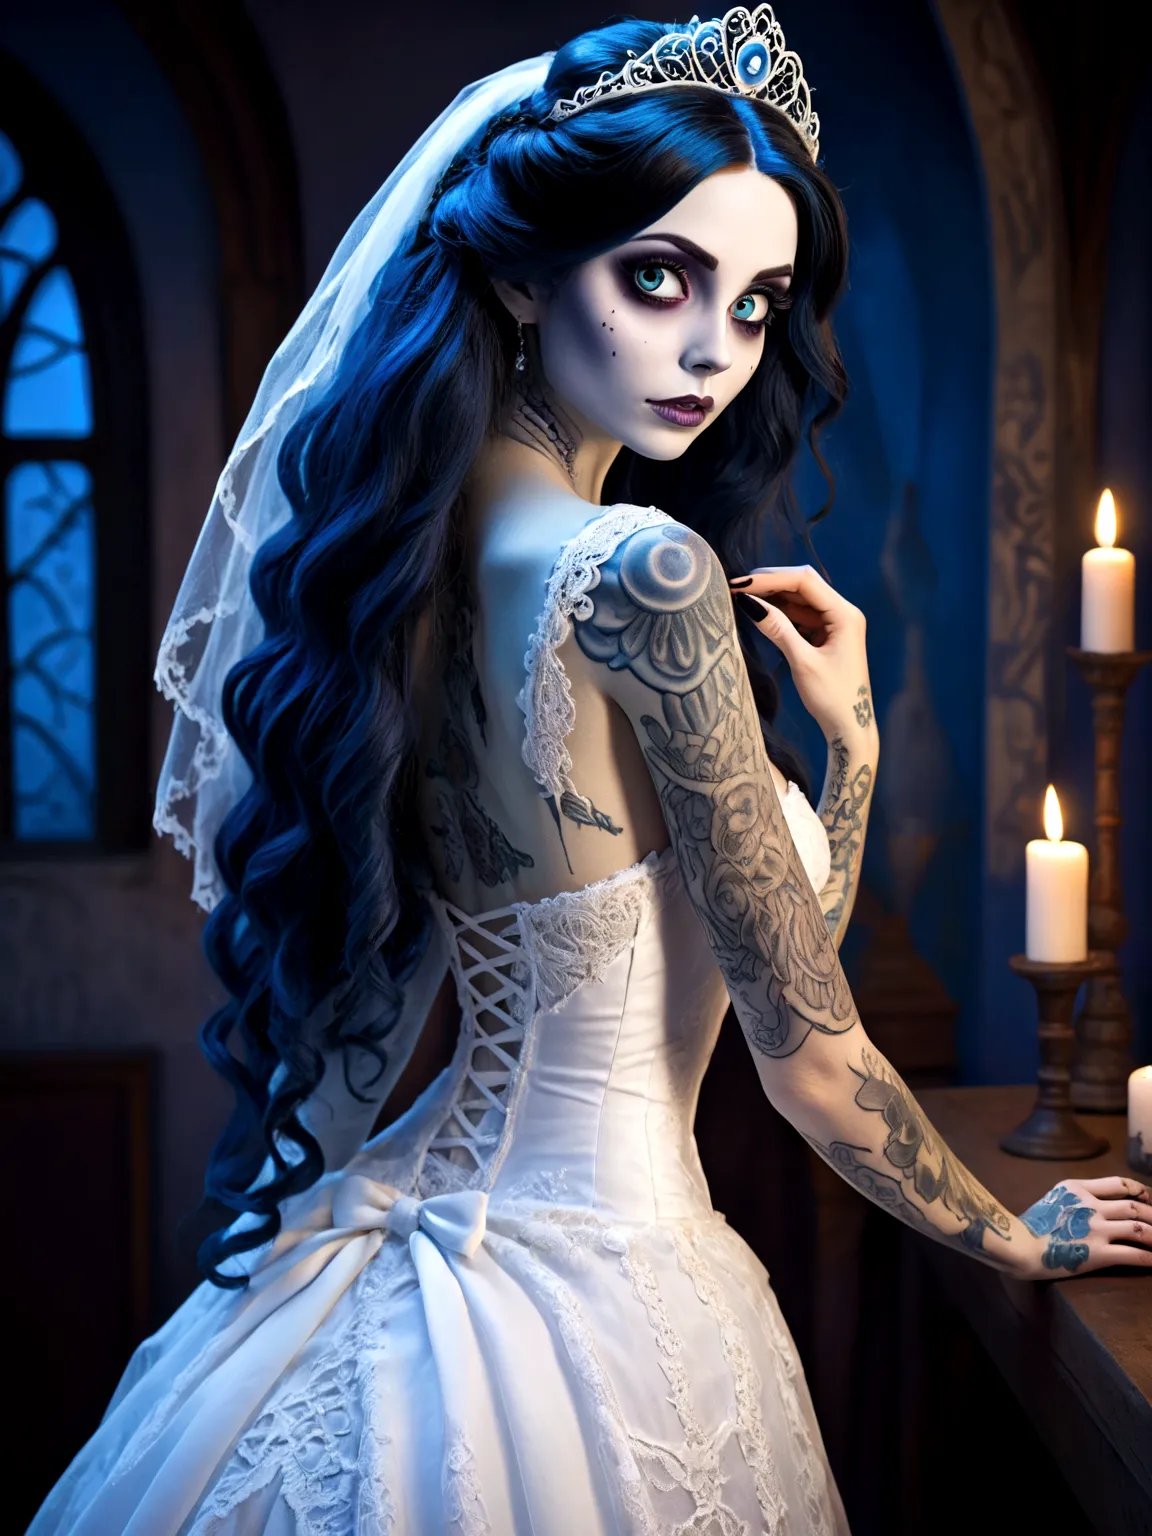 Create a hyper detailed photograph of a corpse bride tattooed young sexy Emily the Corpse Bride, Stunningly perfect gorgeous fac...